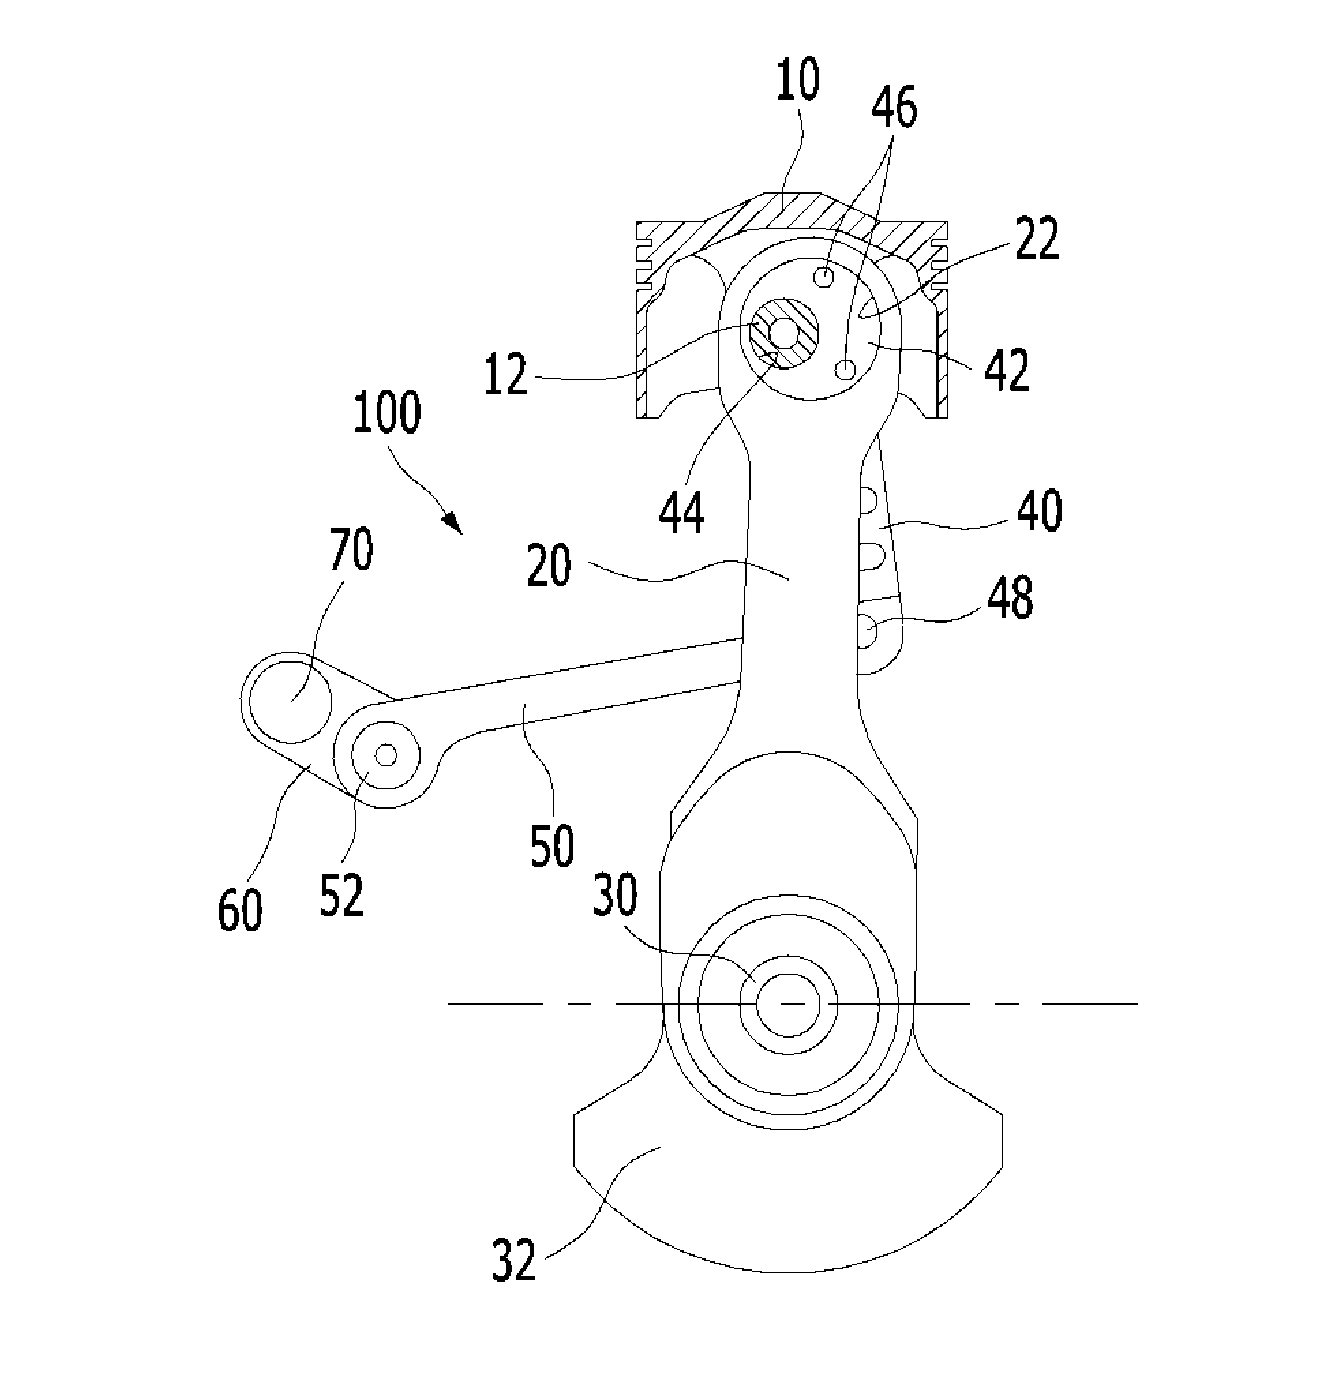 Variable compression ratio control system